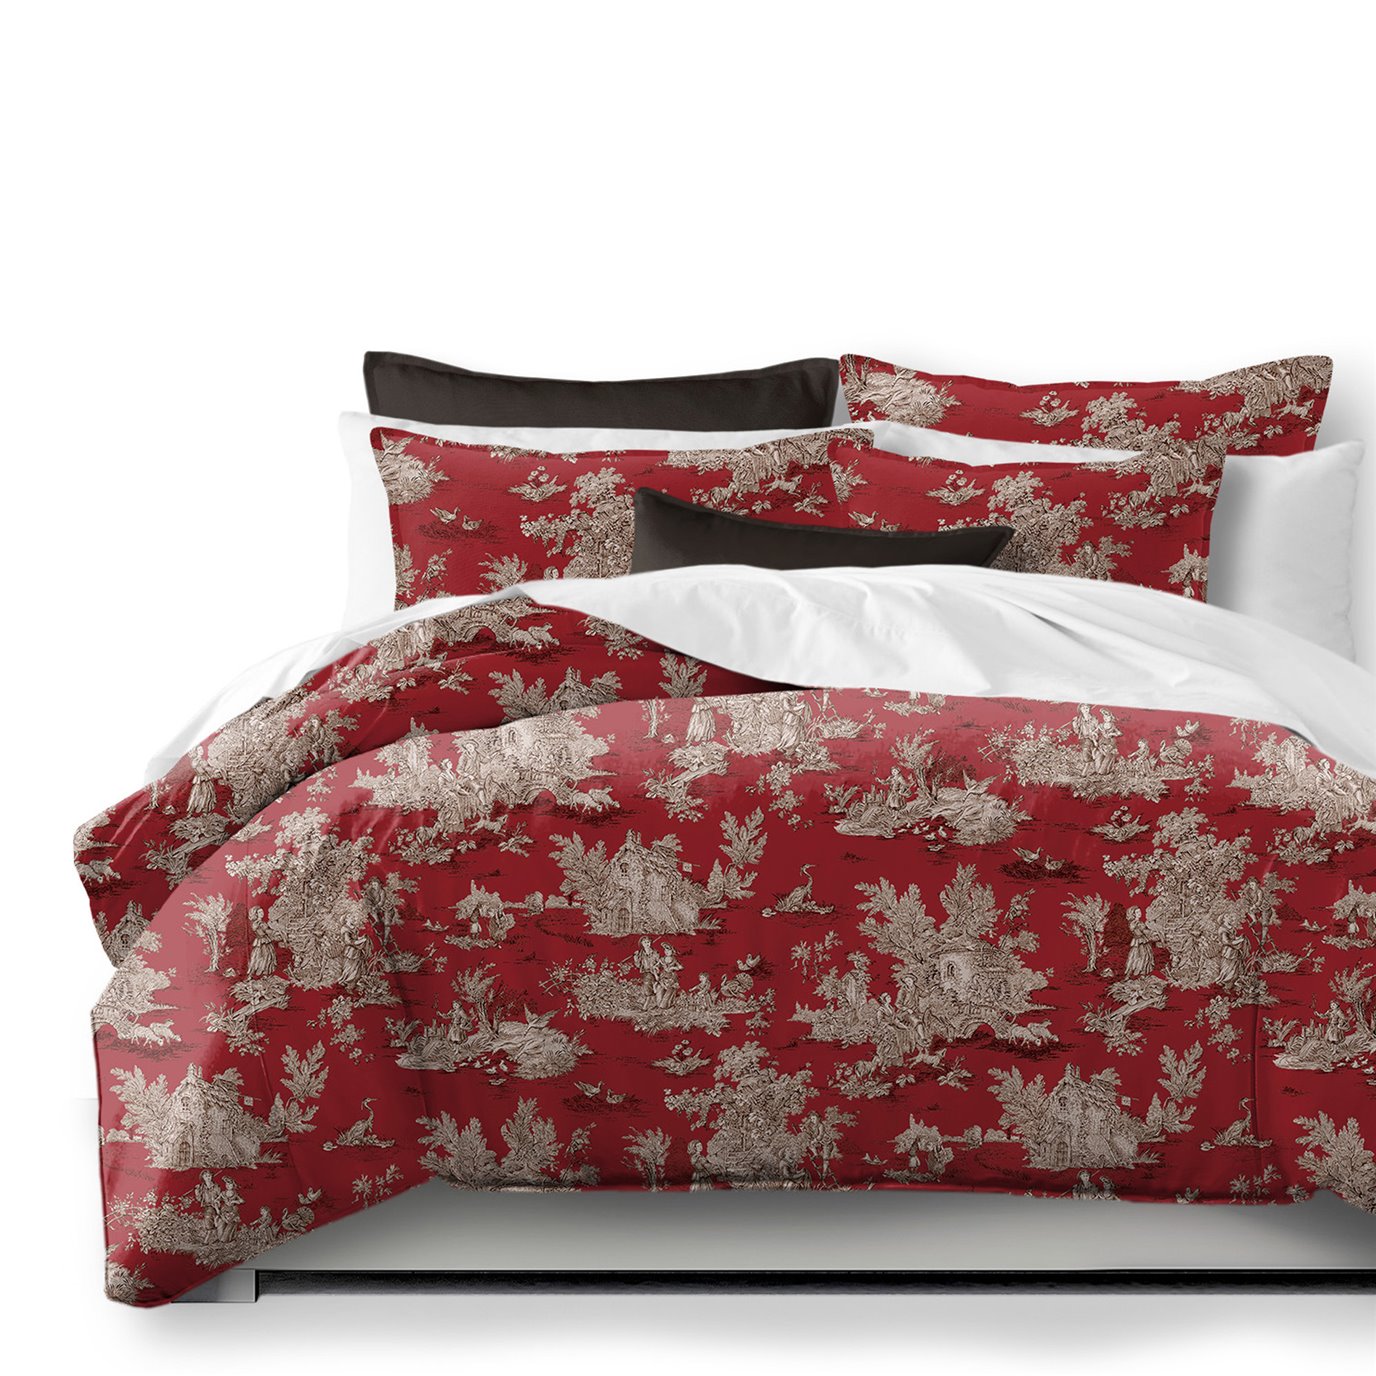 Chateau Red/Black Duvet Cover and Pillow Sham(s) Set - Size Twin